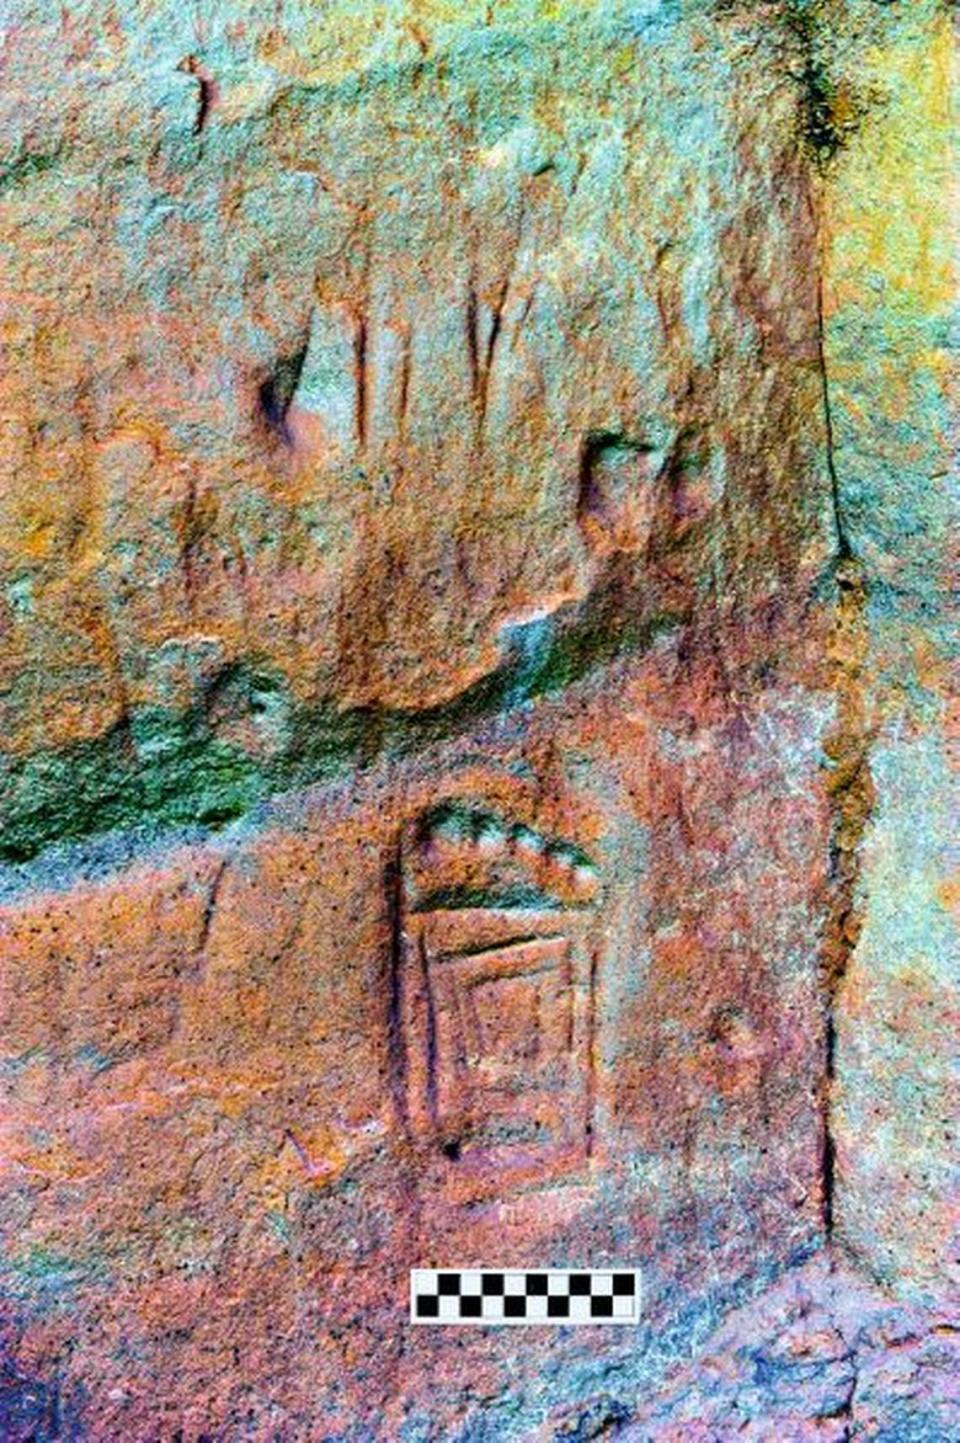 The types of carvings changed throughout the centuries, researchers said.